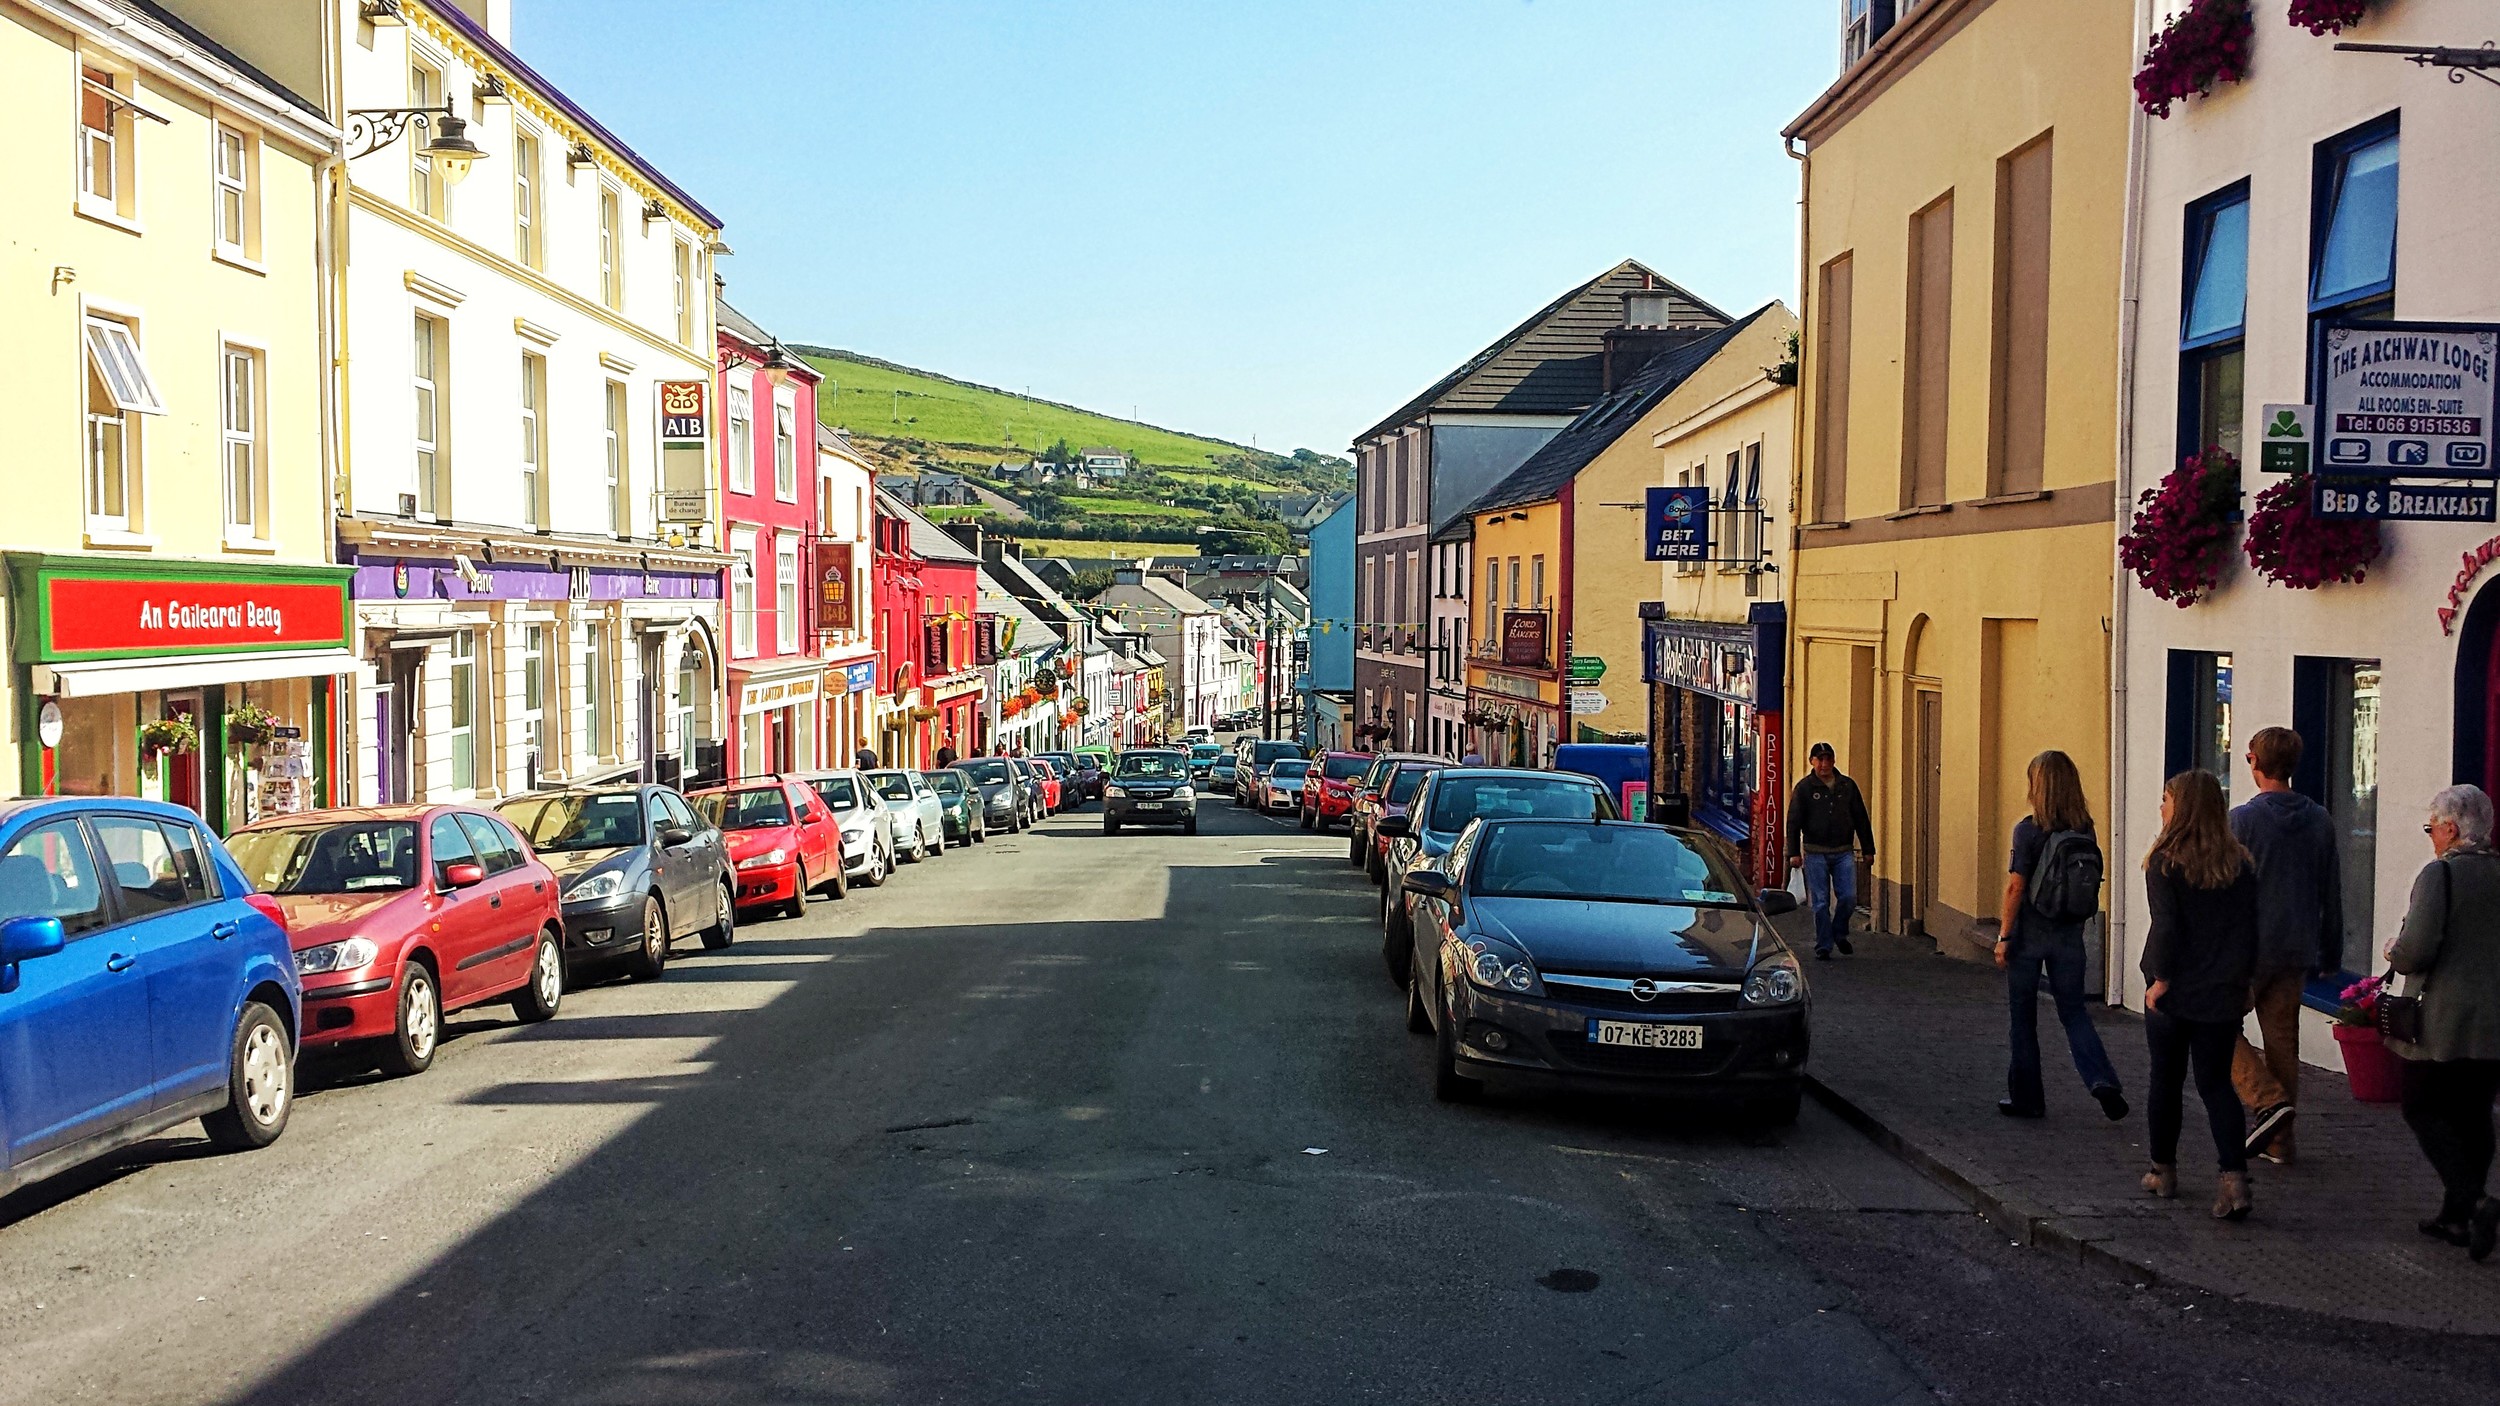 The beautiful town of Dingle